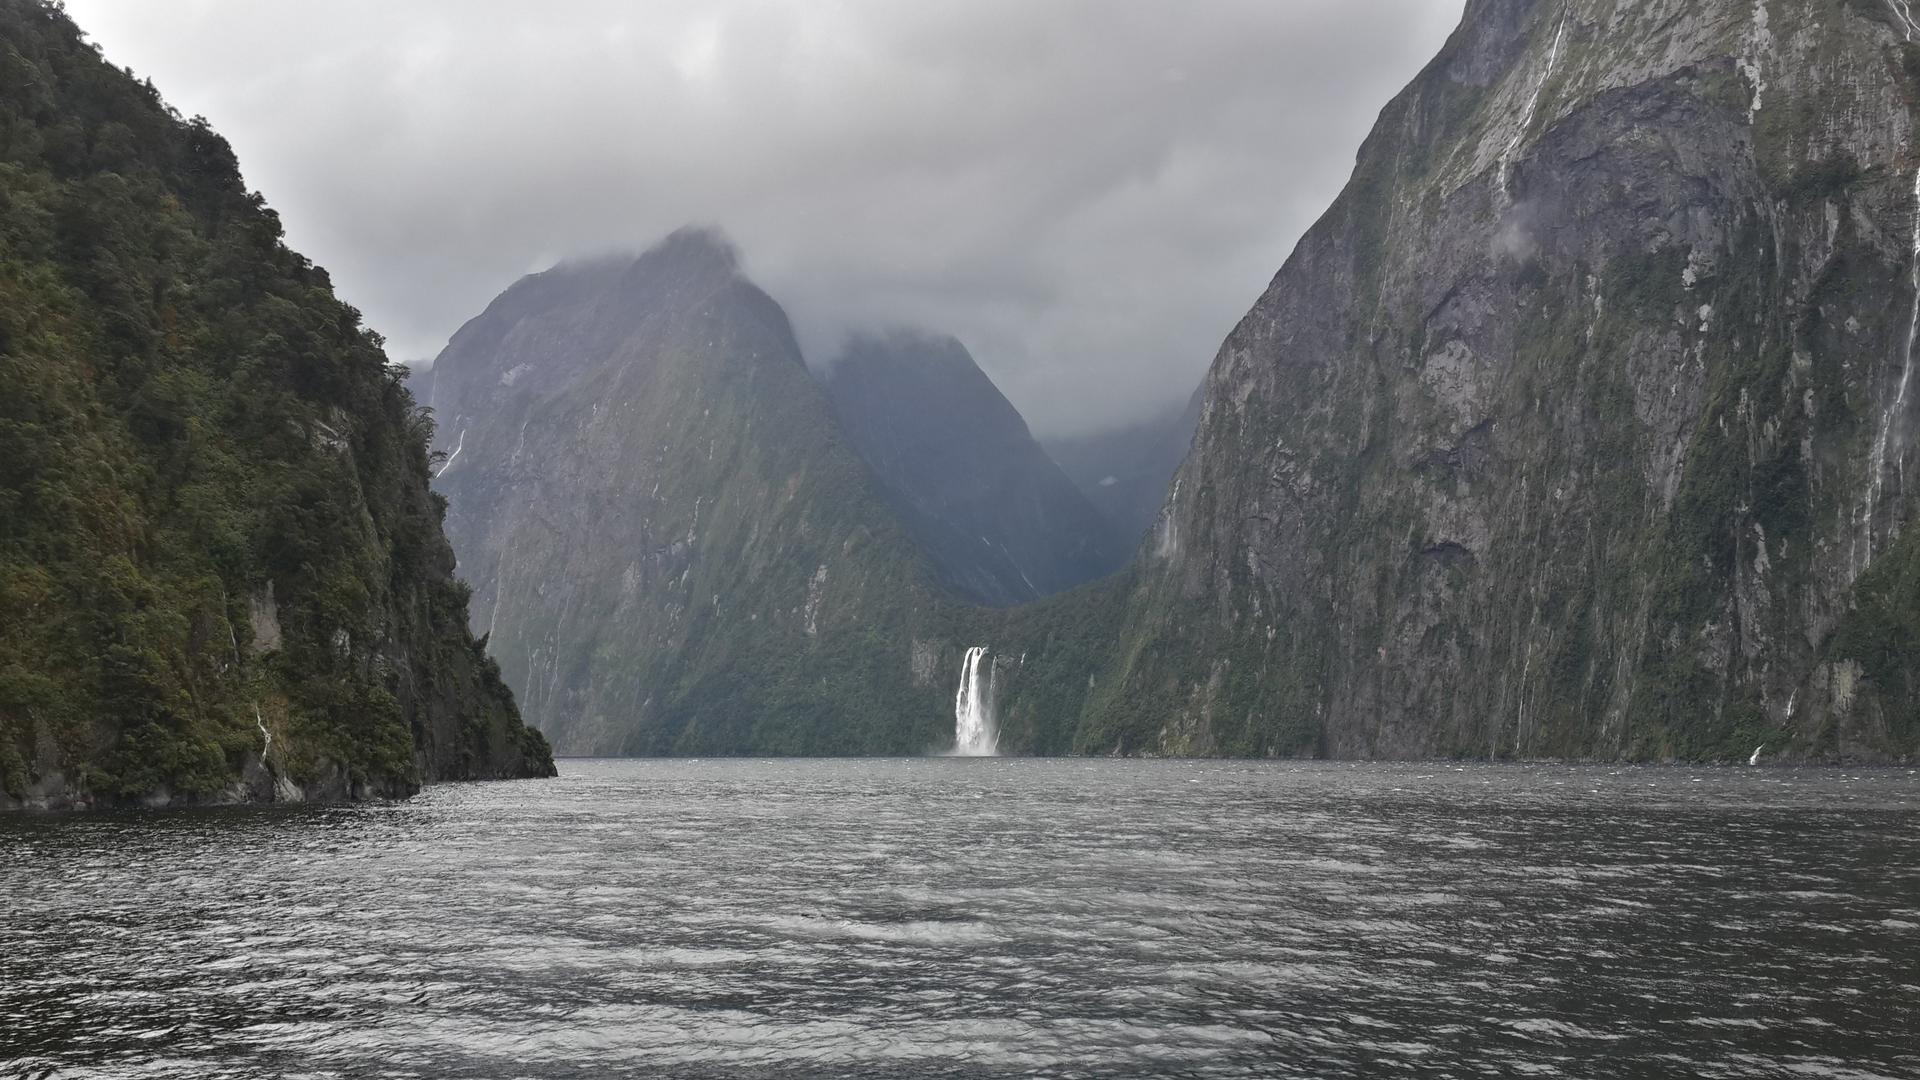 Milford Sound, New Zealand. The bus + boat tour from Te Anau was 100$ or 70€. Maybe it was the weather but the tour wasn't as mind blowing as I expected.